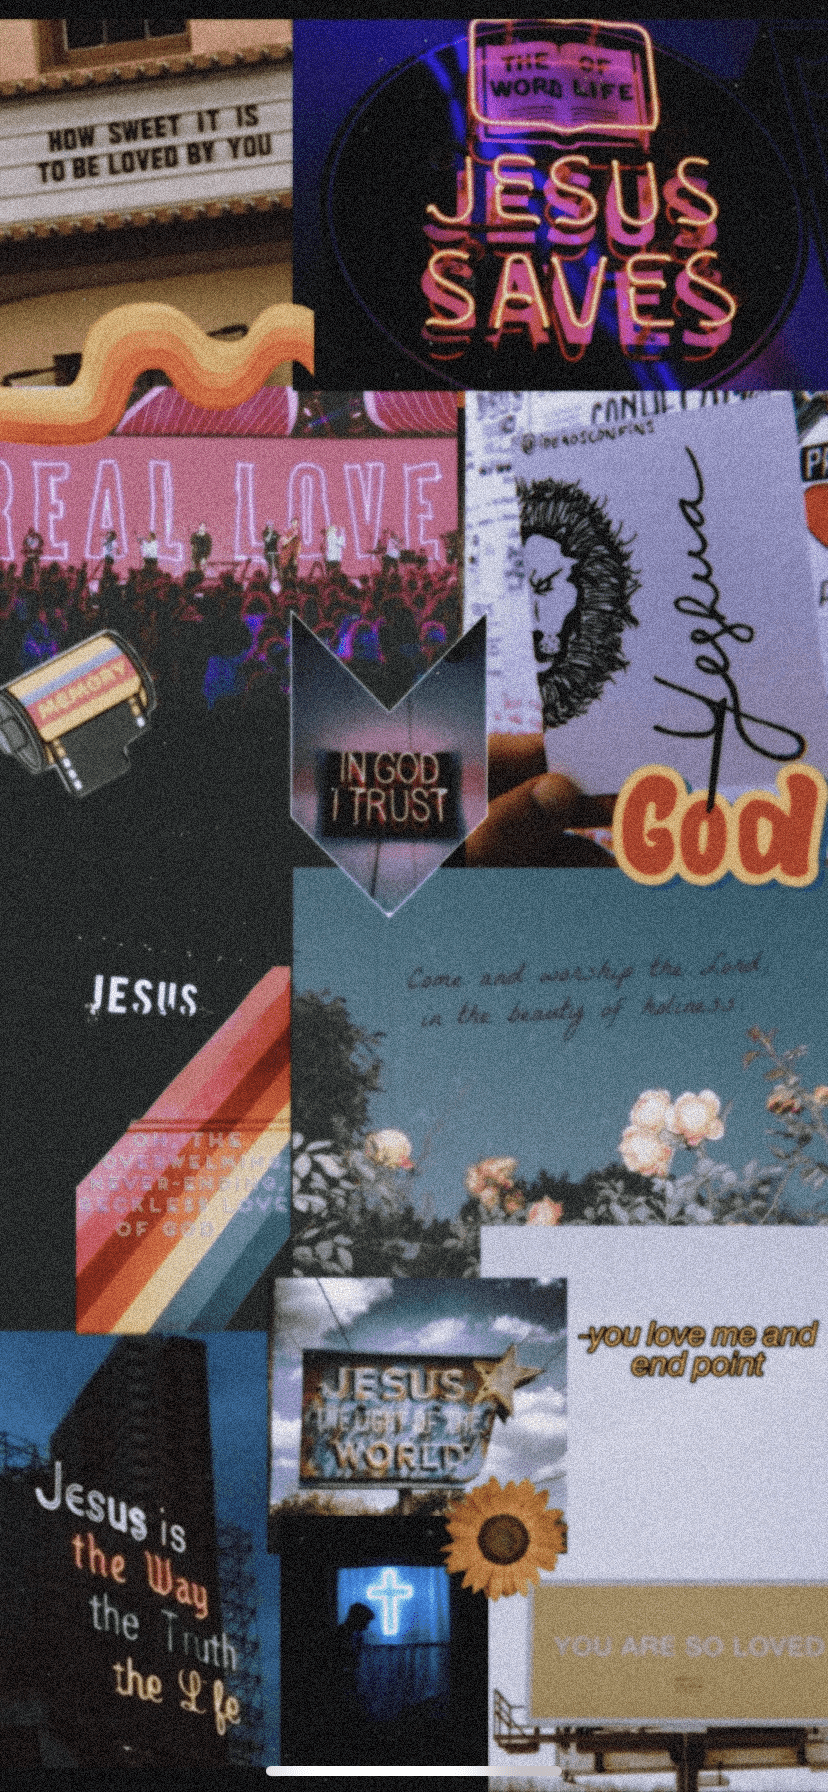 A collage of Christian themes including a neon sign that says 